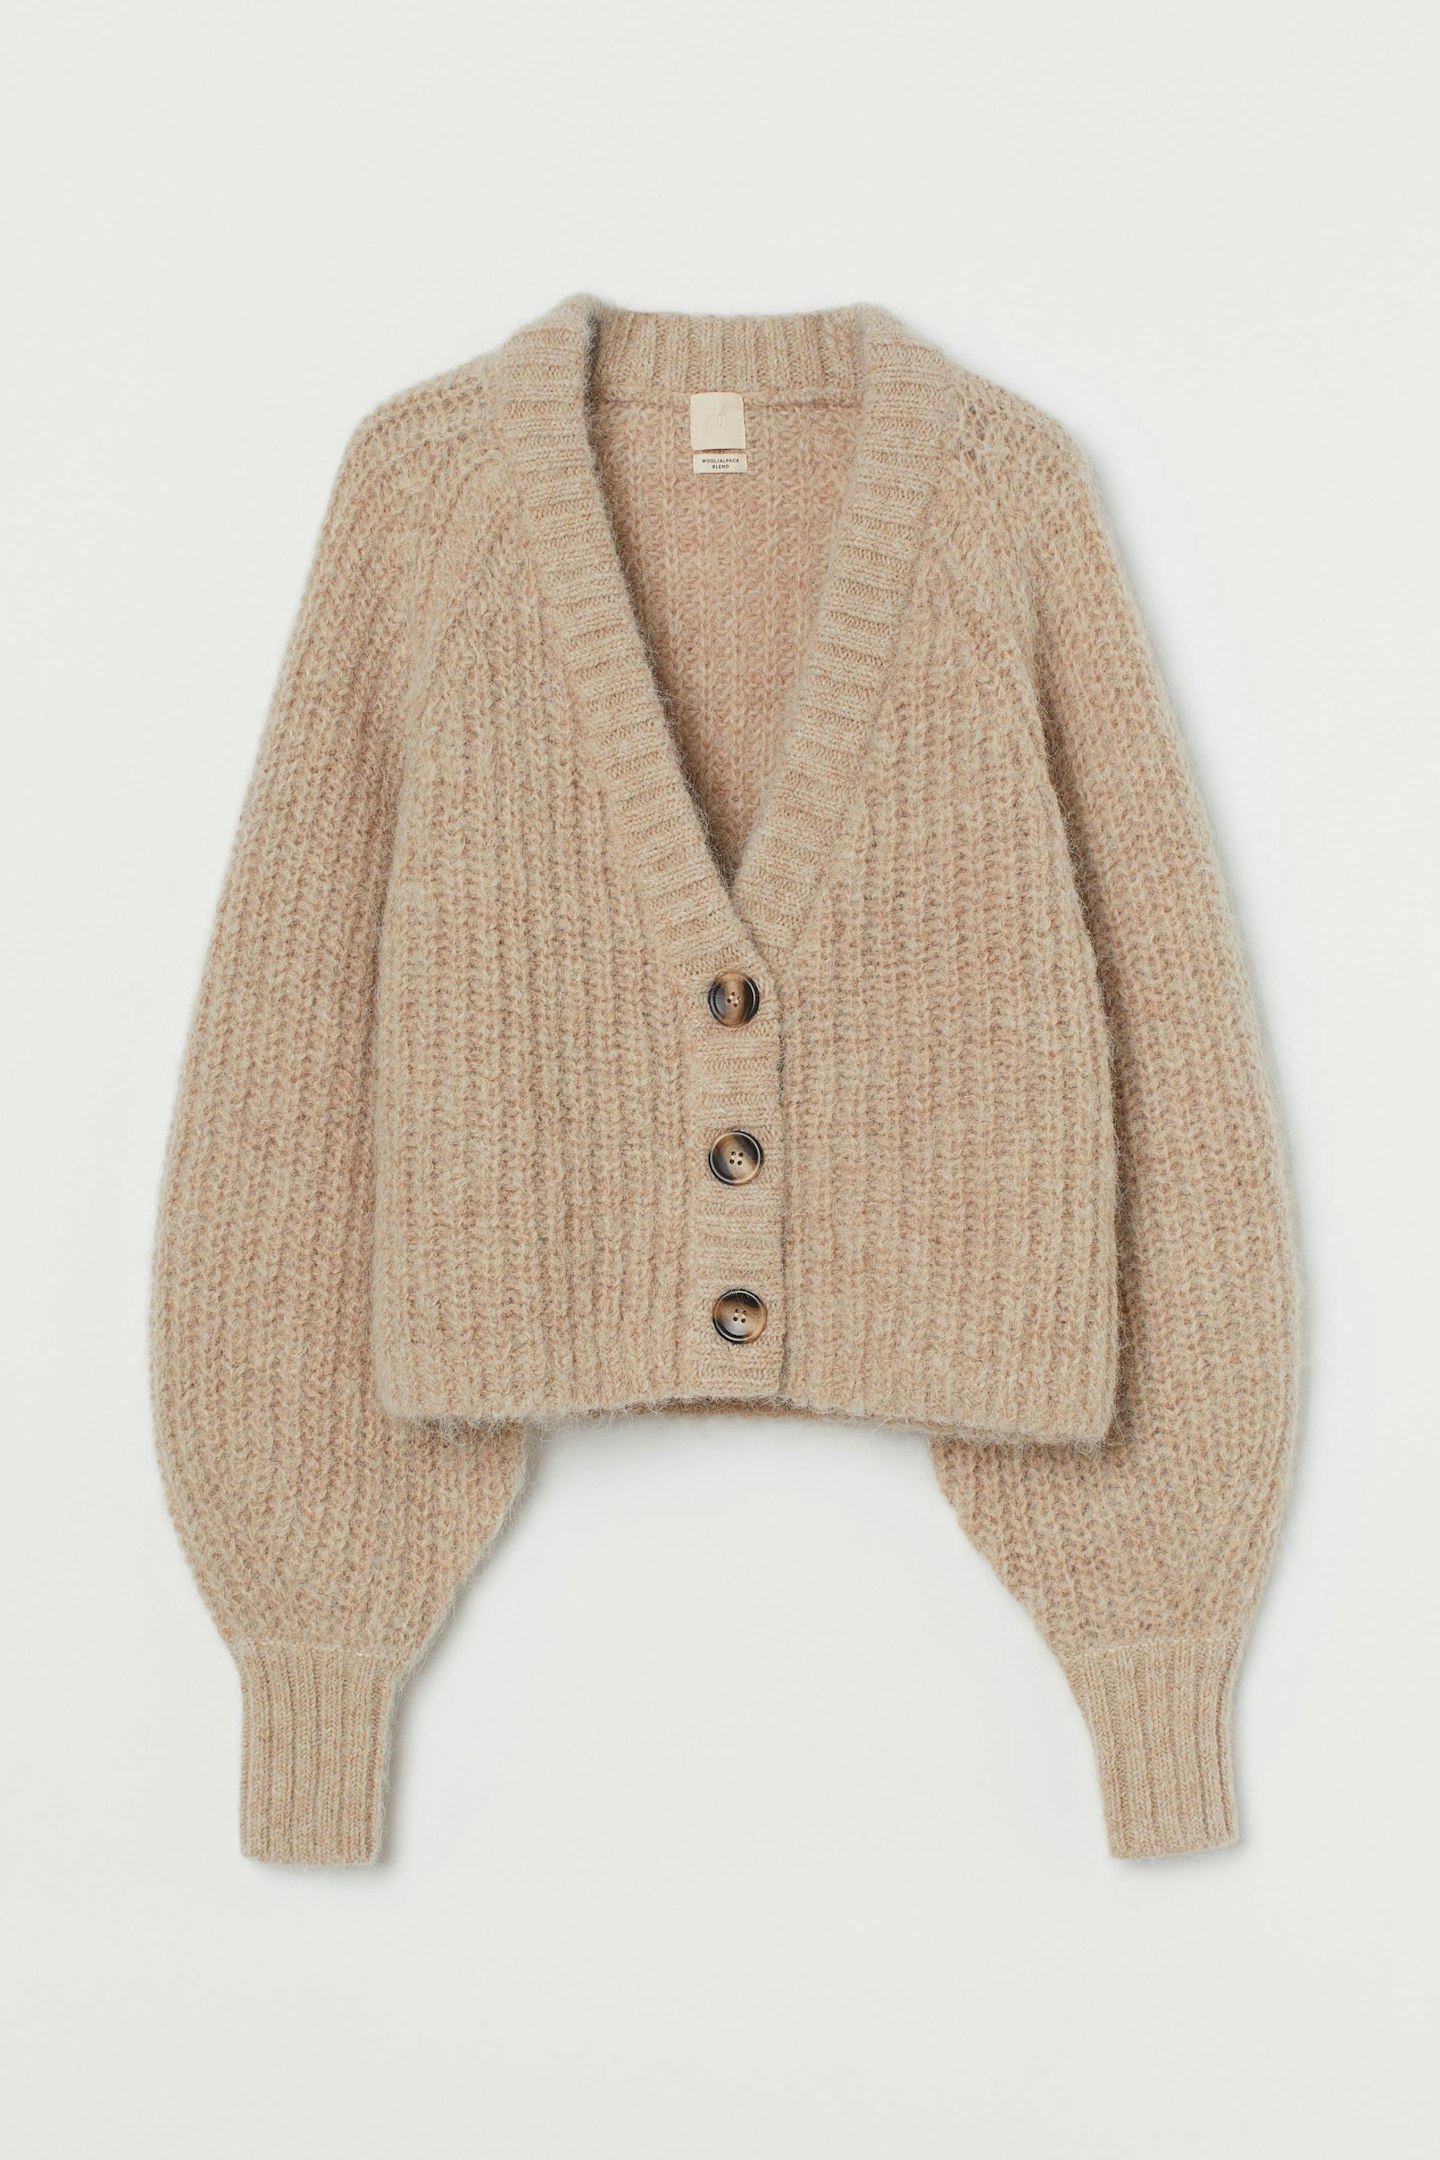 The Chunky Cardi – H&M, Knitted Wool Cardigan, £39.99